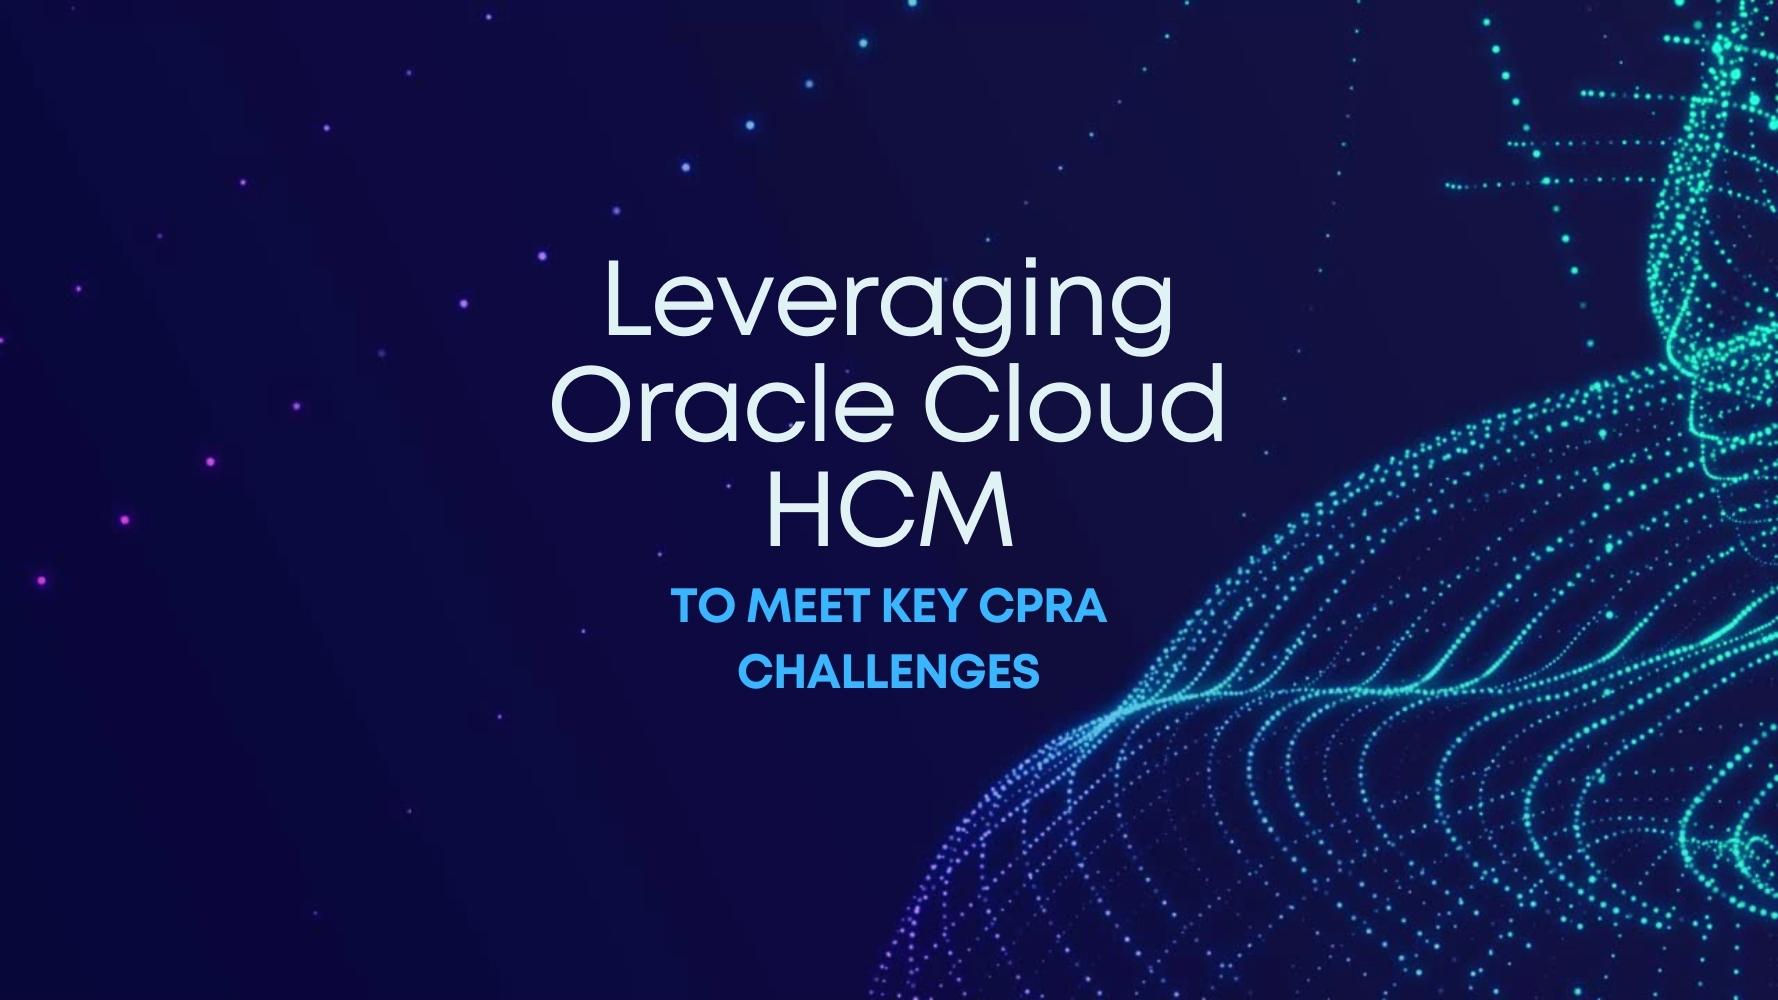 ATTACHMENT DETAILS Leveraging-Oracle-Cloud-HCM-to-meet-key-CPRA-challenges.jpg